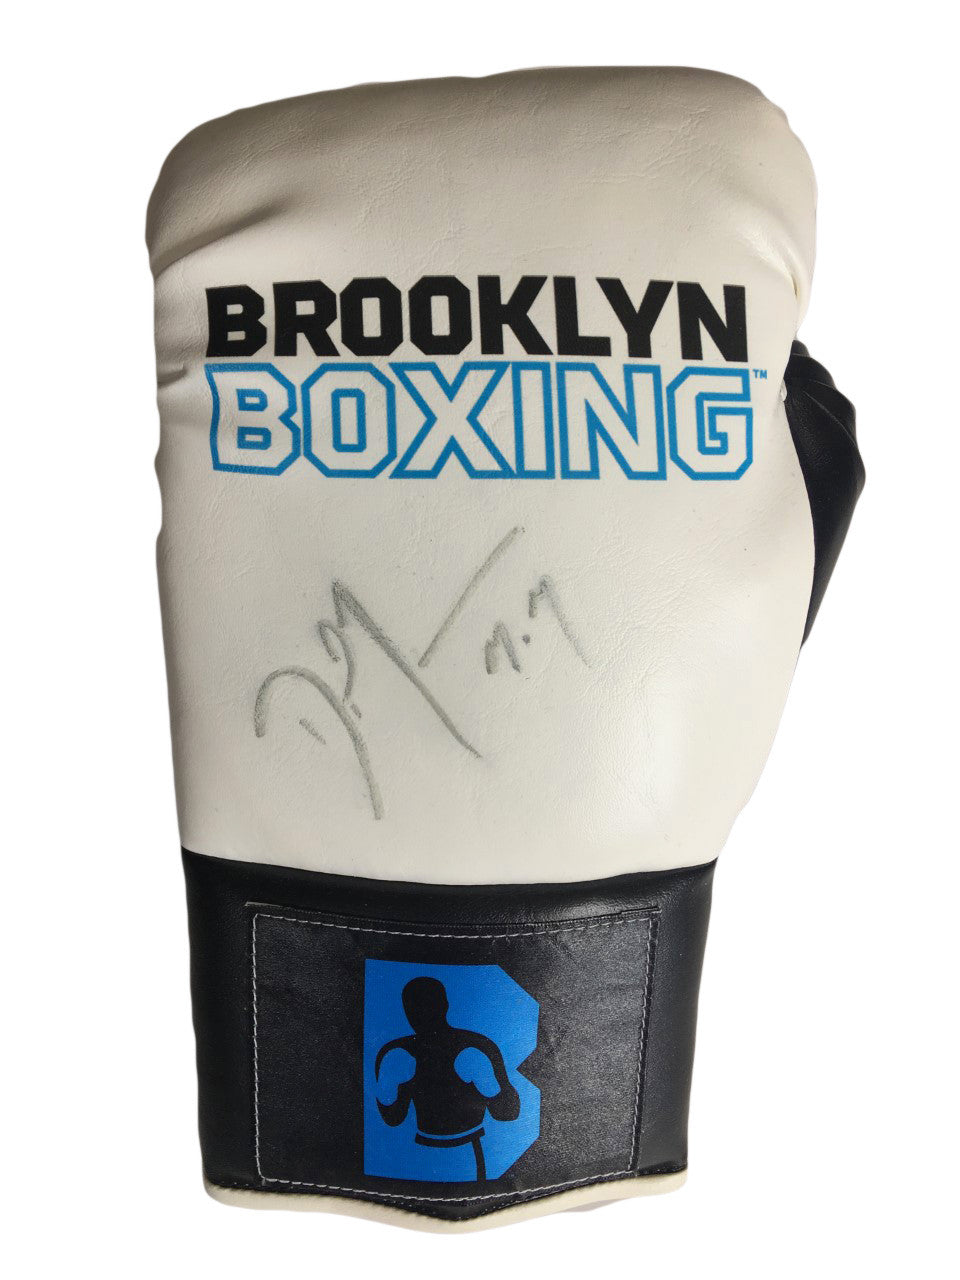 Danny Jacobs Autographed Brooklyn Boxing Glove with a Silver Marker.